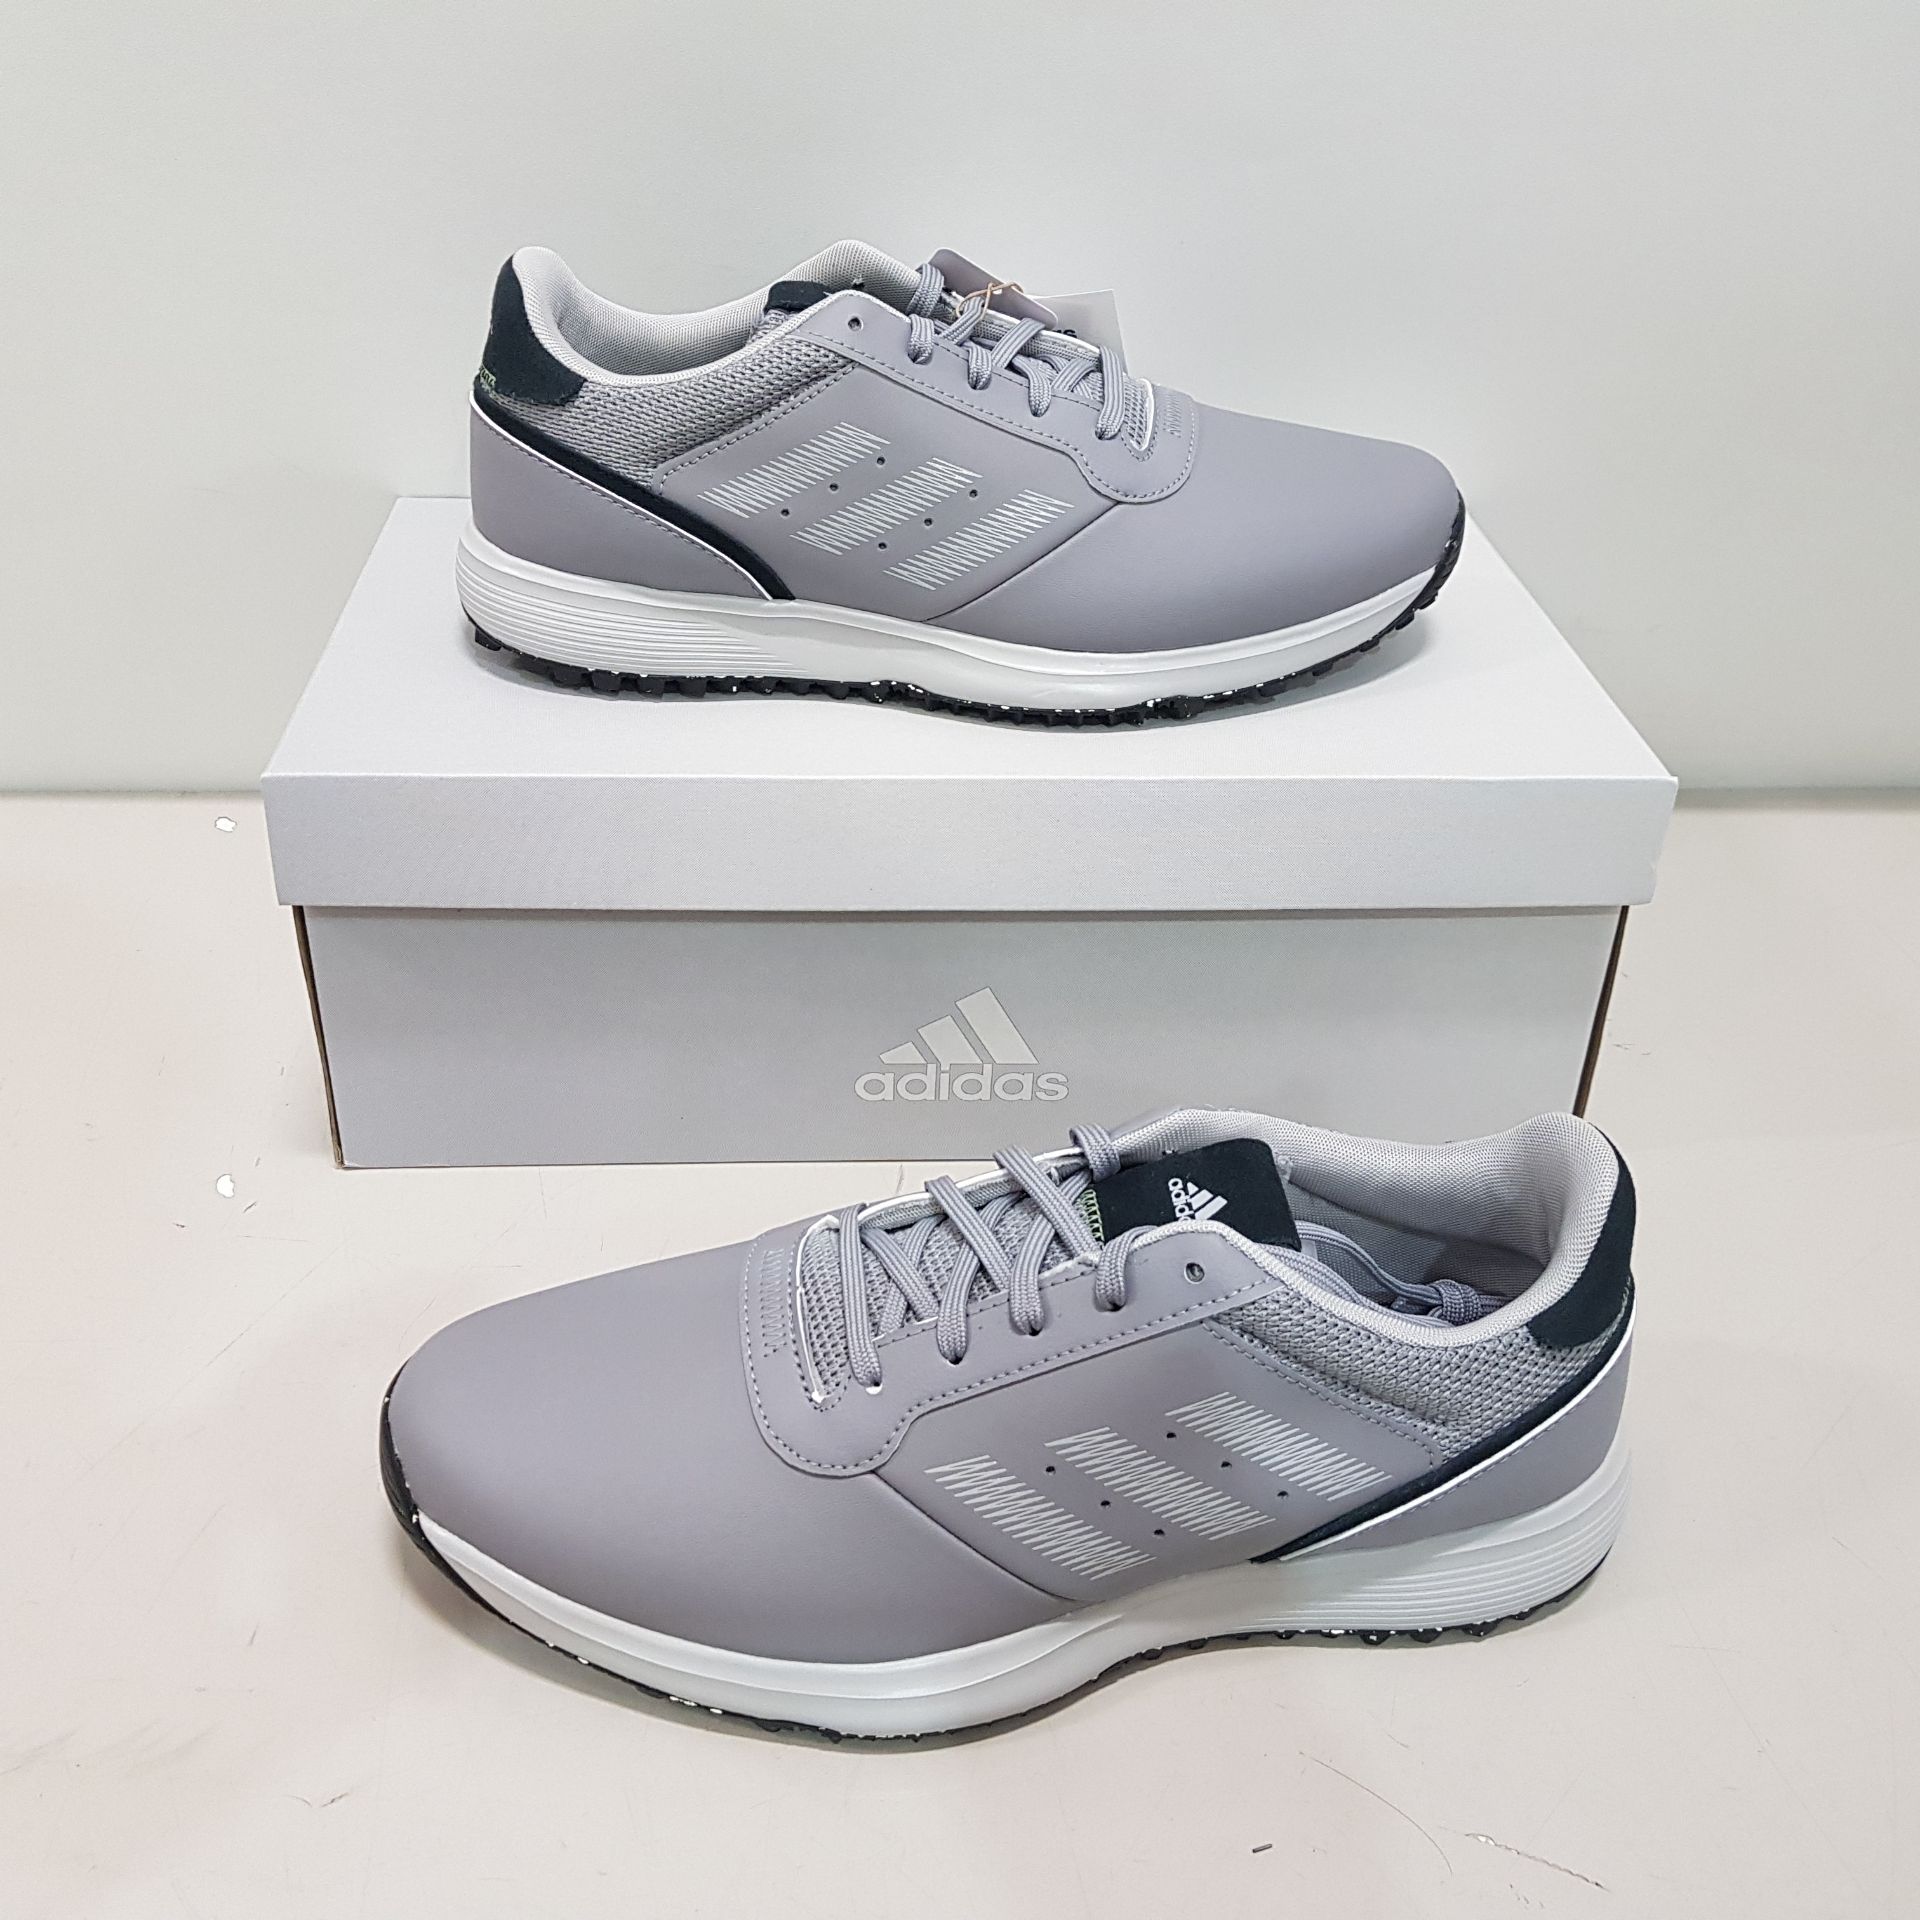 5 X BRAND NEW BOXED ADIDAS GOLF TRAINERS IN GREY / BLACK ALL IN SIZE UK 9 ( GZ3884)